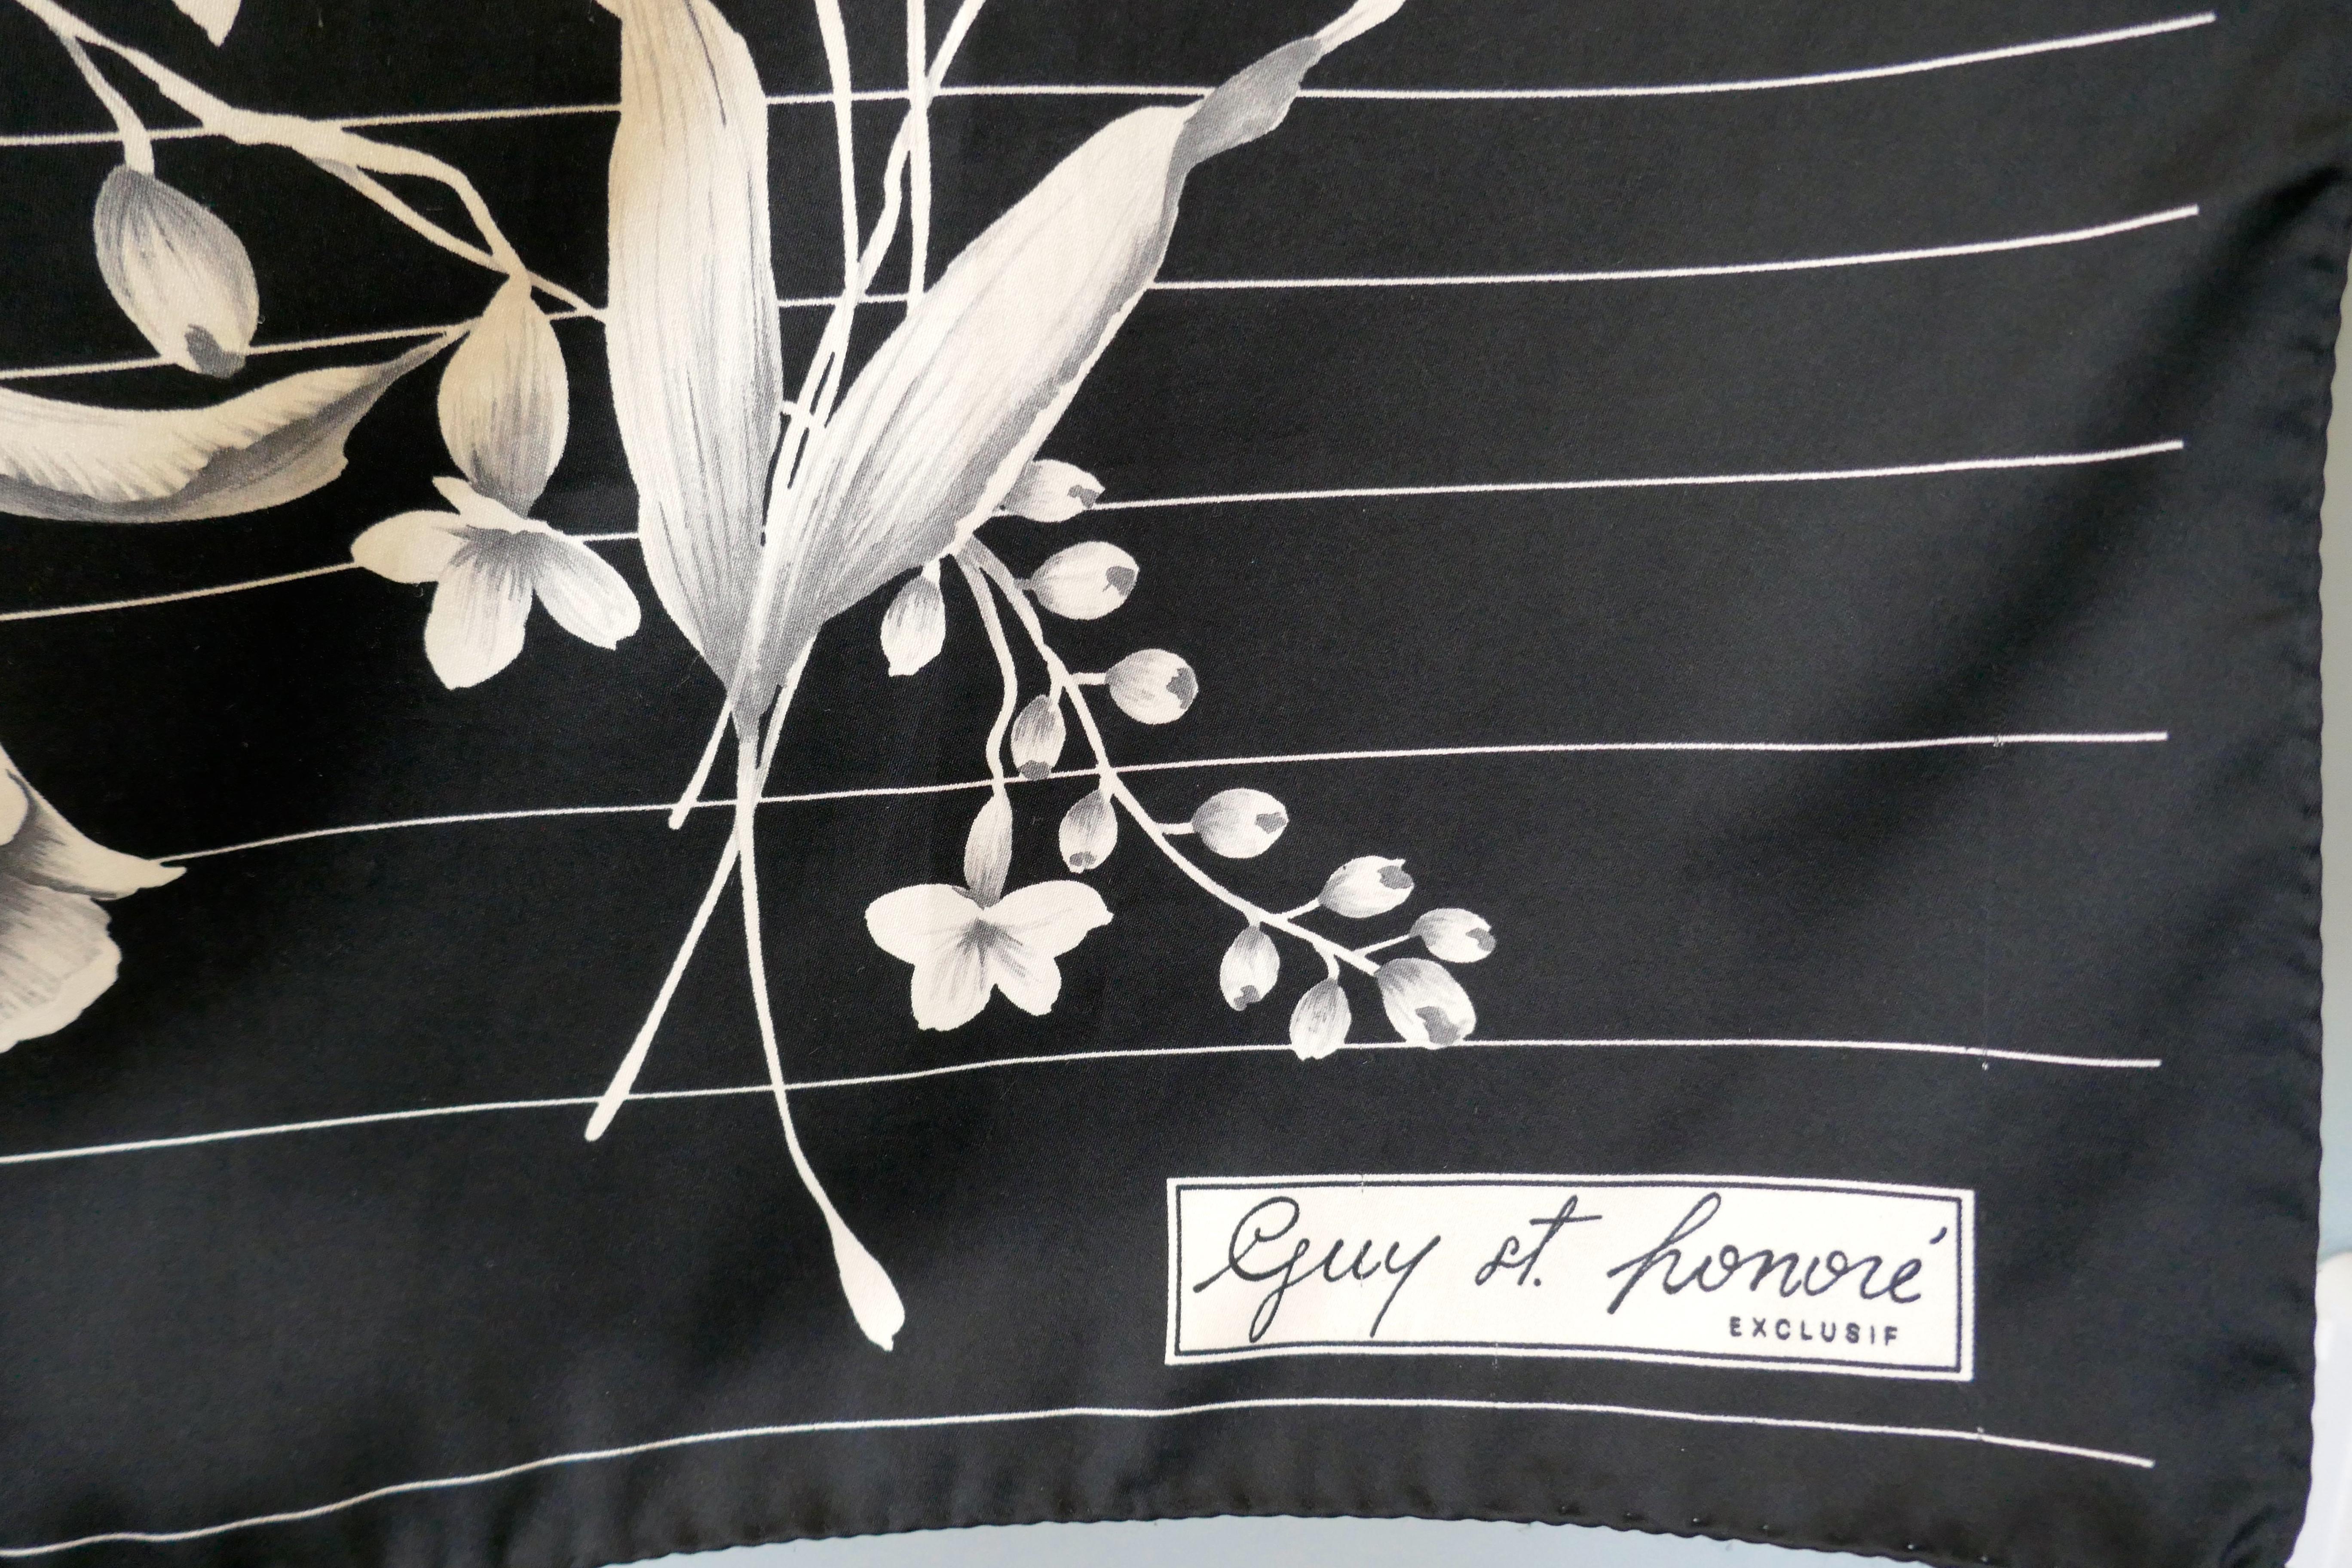 guy st honore scarf